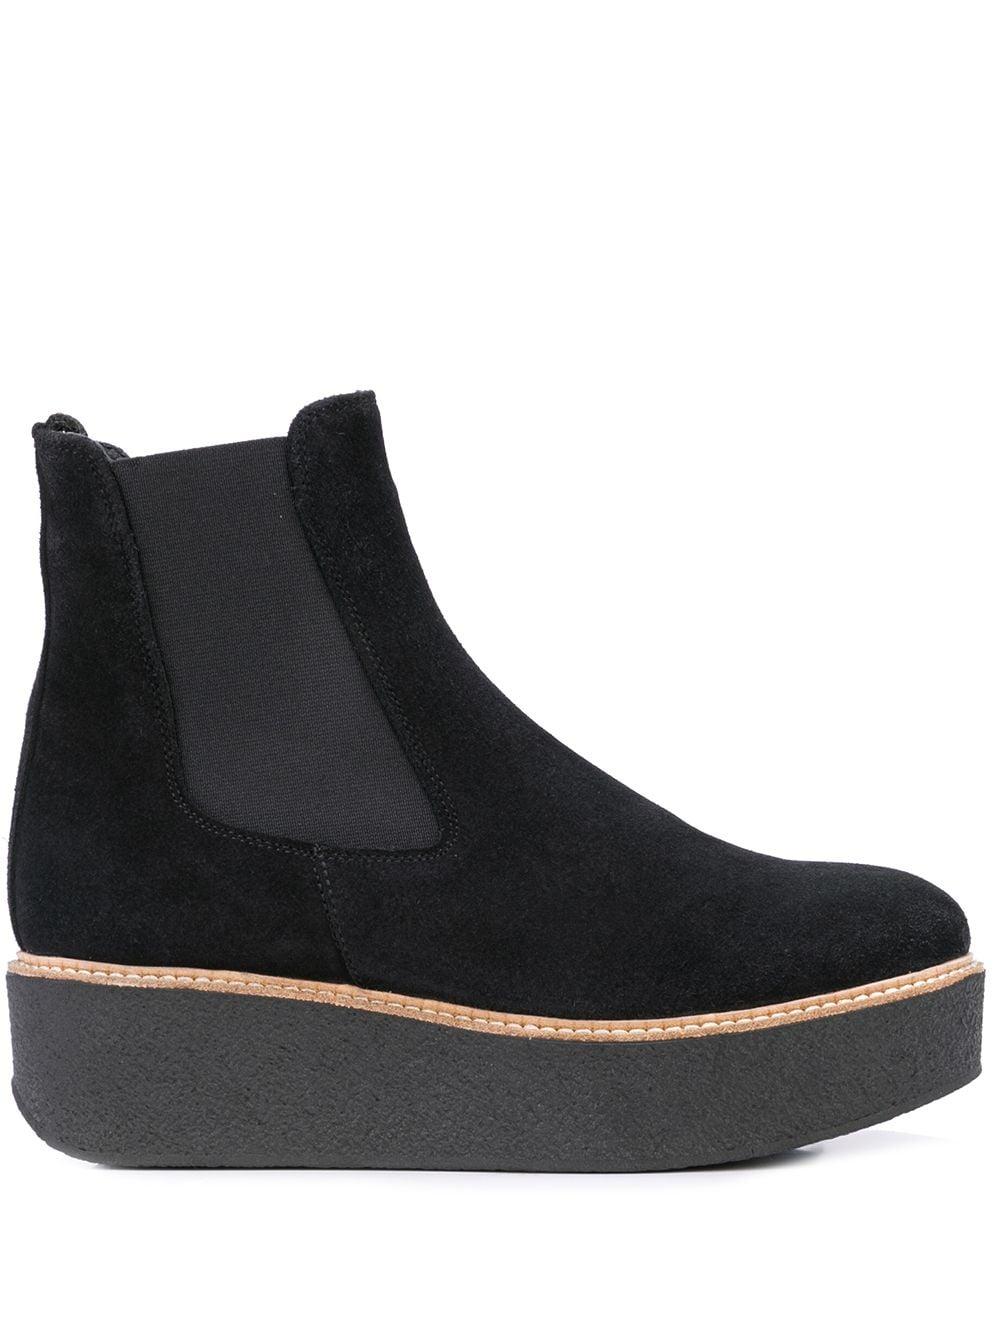 Flamingos Pooky Platform Boots in Black | Lyst